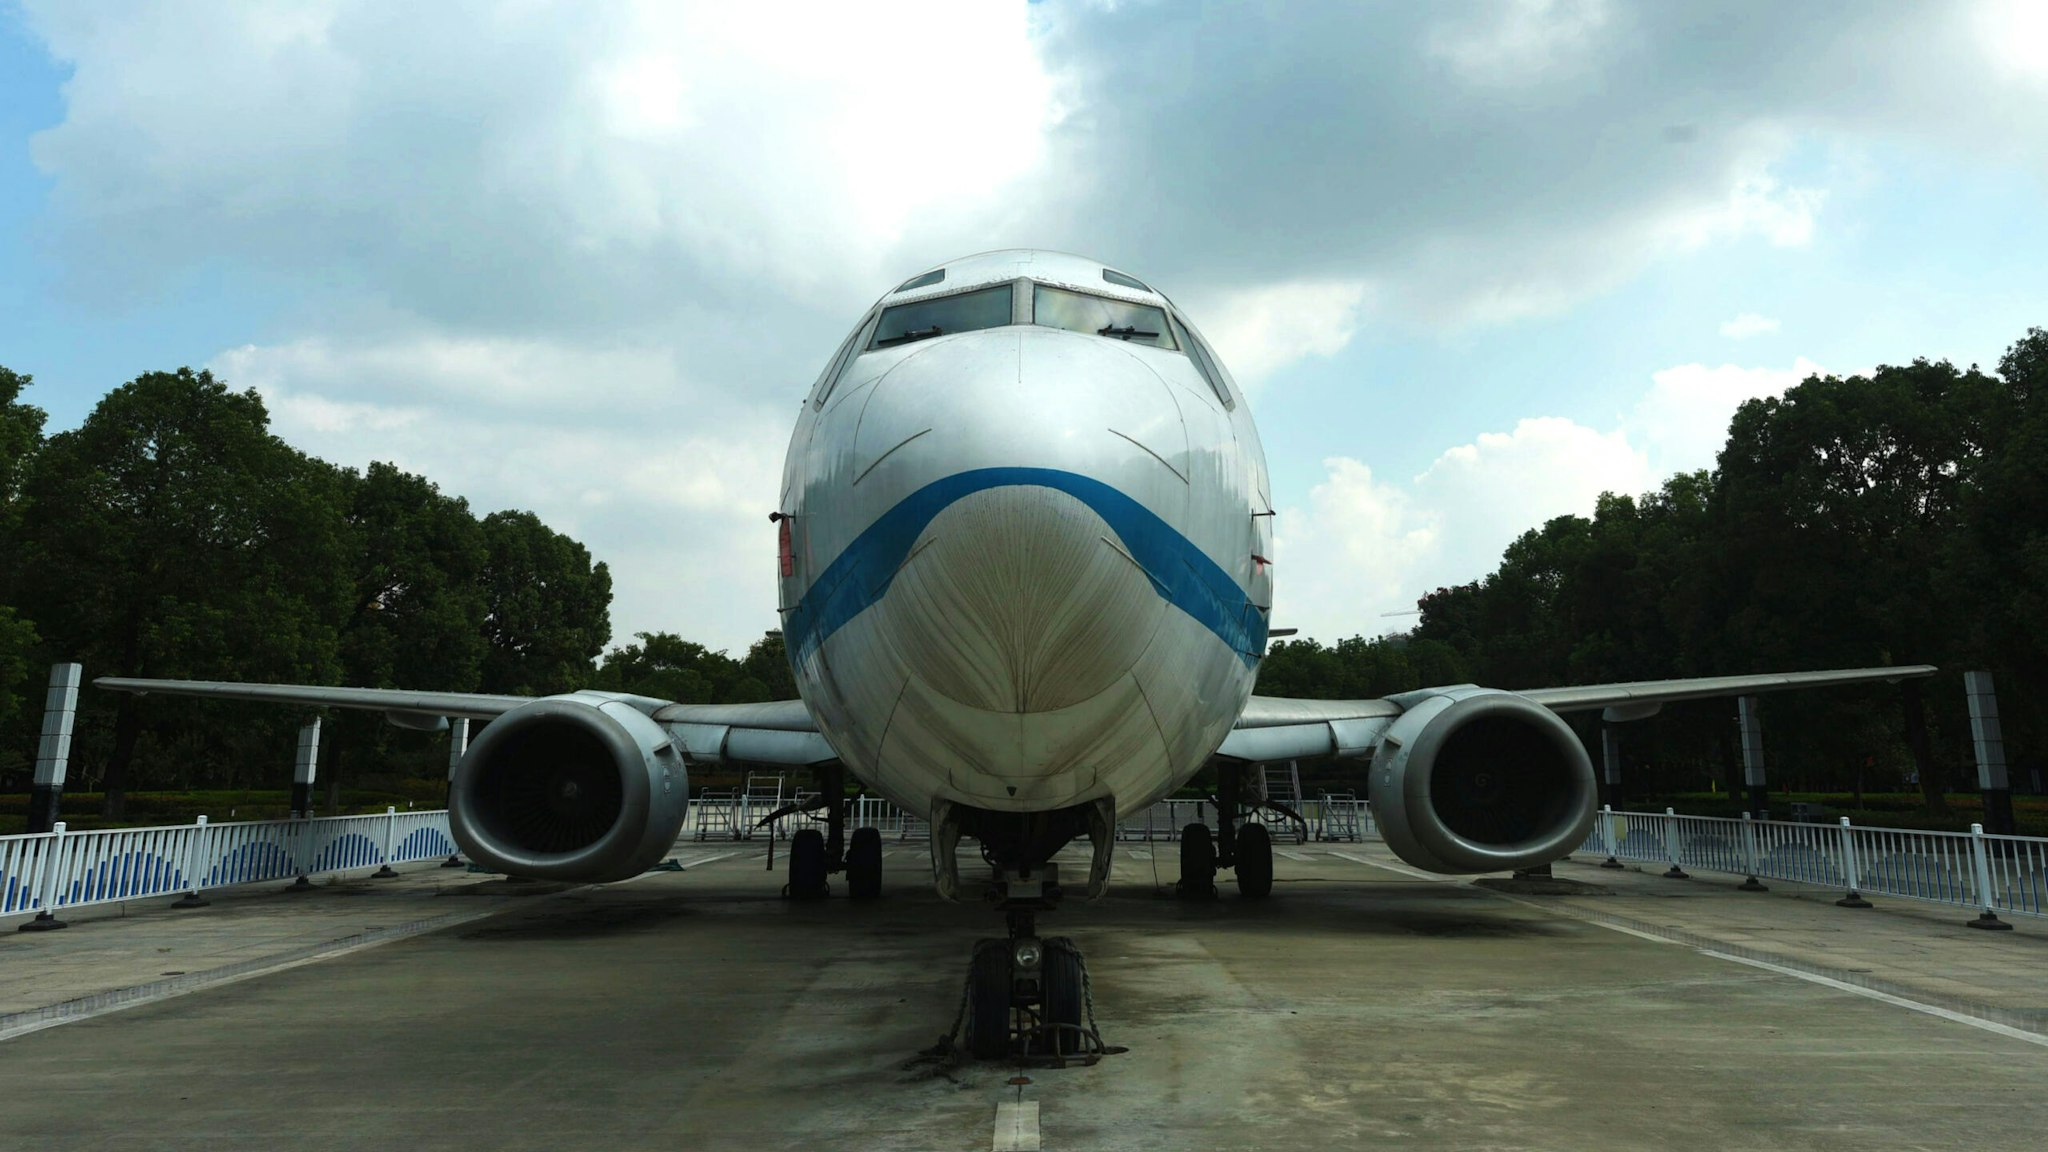 HANGZHOU, CHINA - OCTOBER 12, 2020 - Boeing 737-300 aircraft parked in Zhejiang communications vocational and technical college, Hangzhou City, Zhejiang Province, China, October 12, 2020.